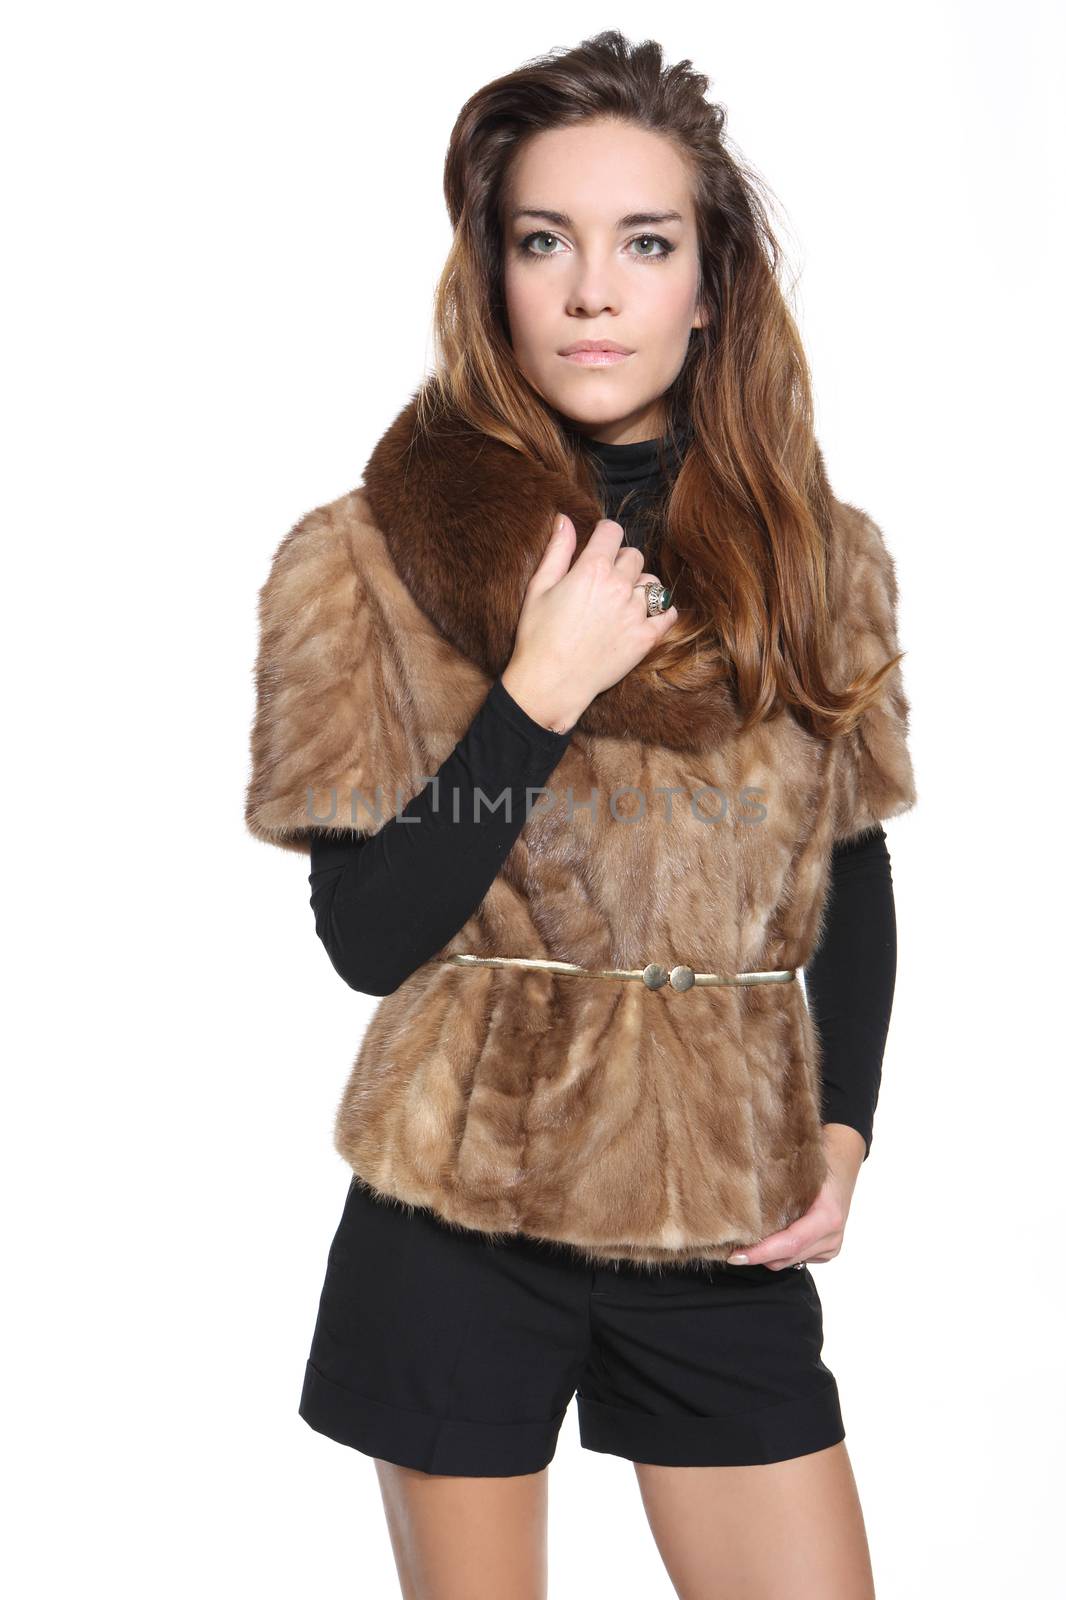 Fashion model in a fashionable vest with fur